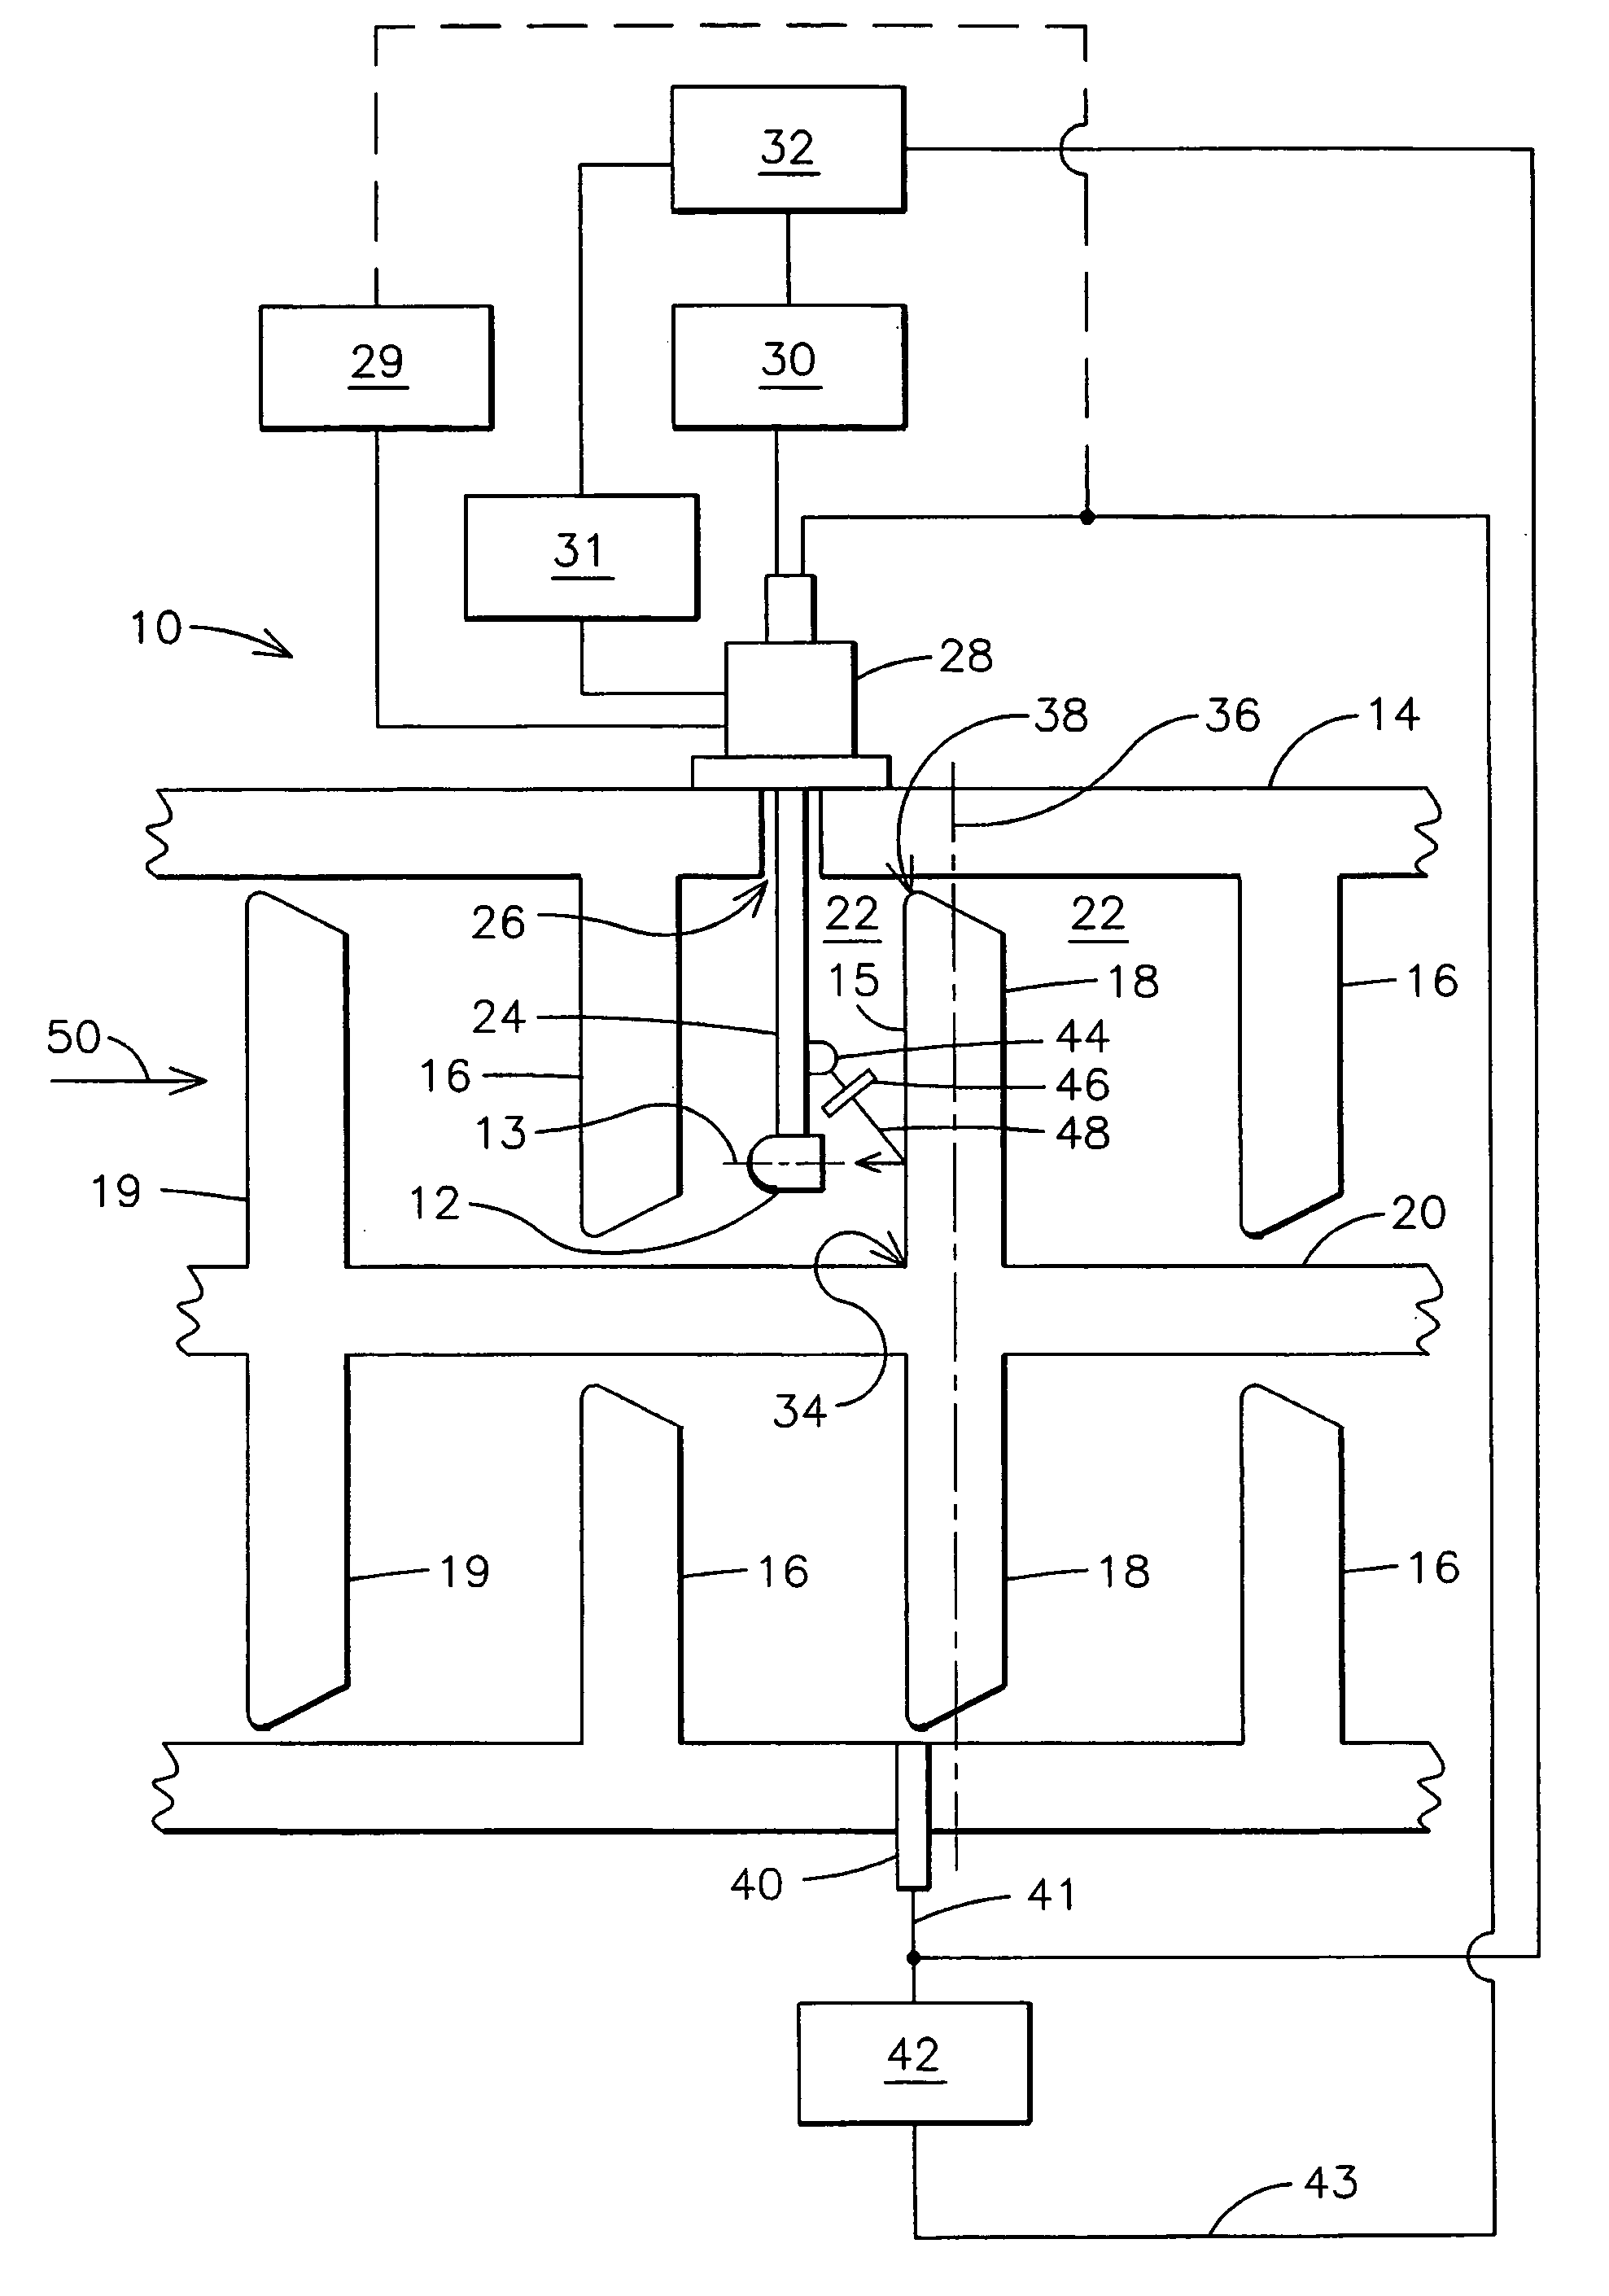 In situ combustion turbine engine airfoil inspection